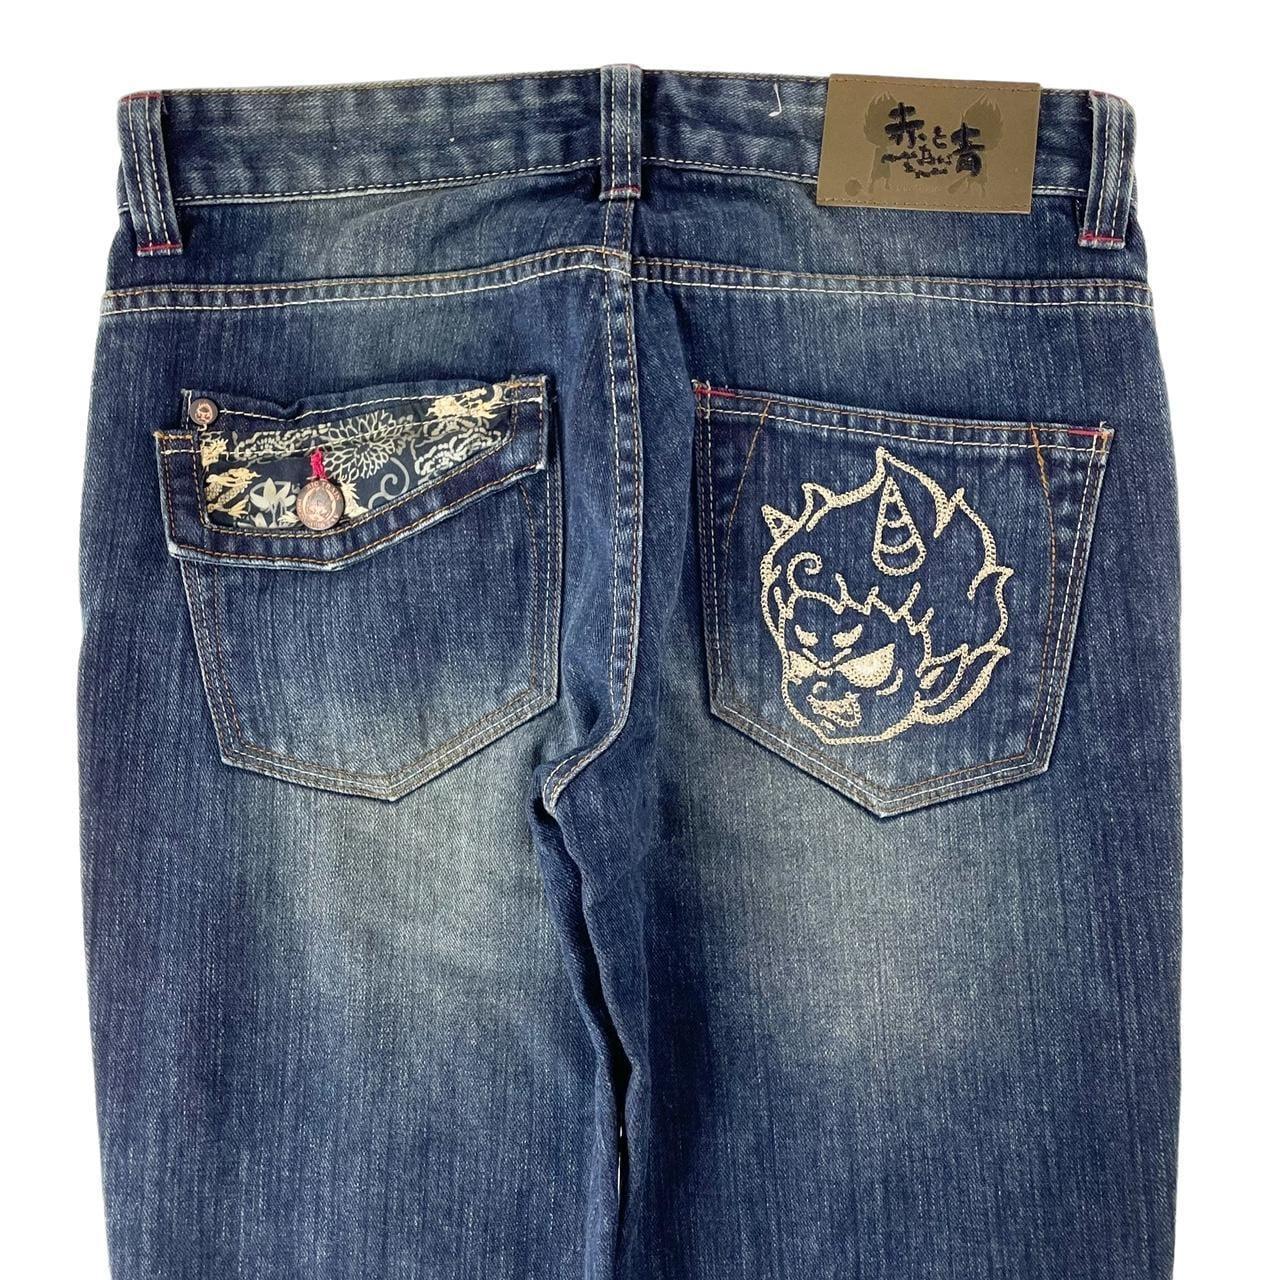 Vintage Big train monster Japanese denim jeans trousers W32 - Known Source